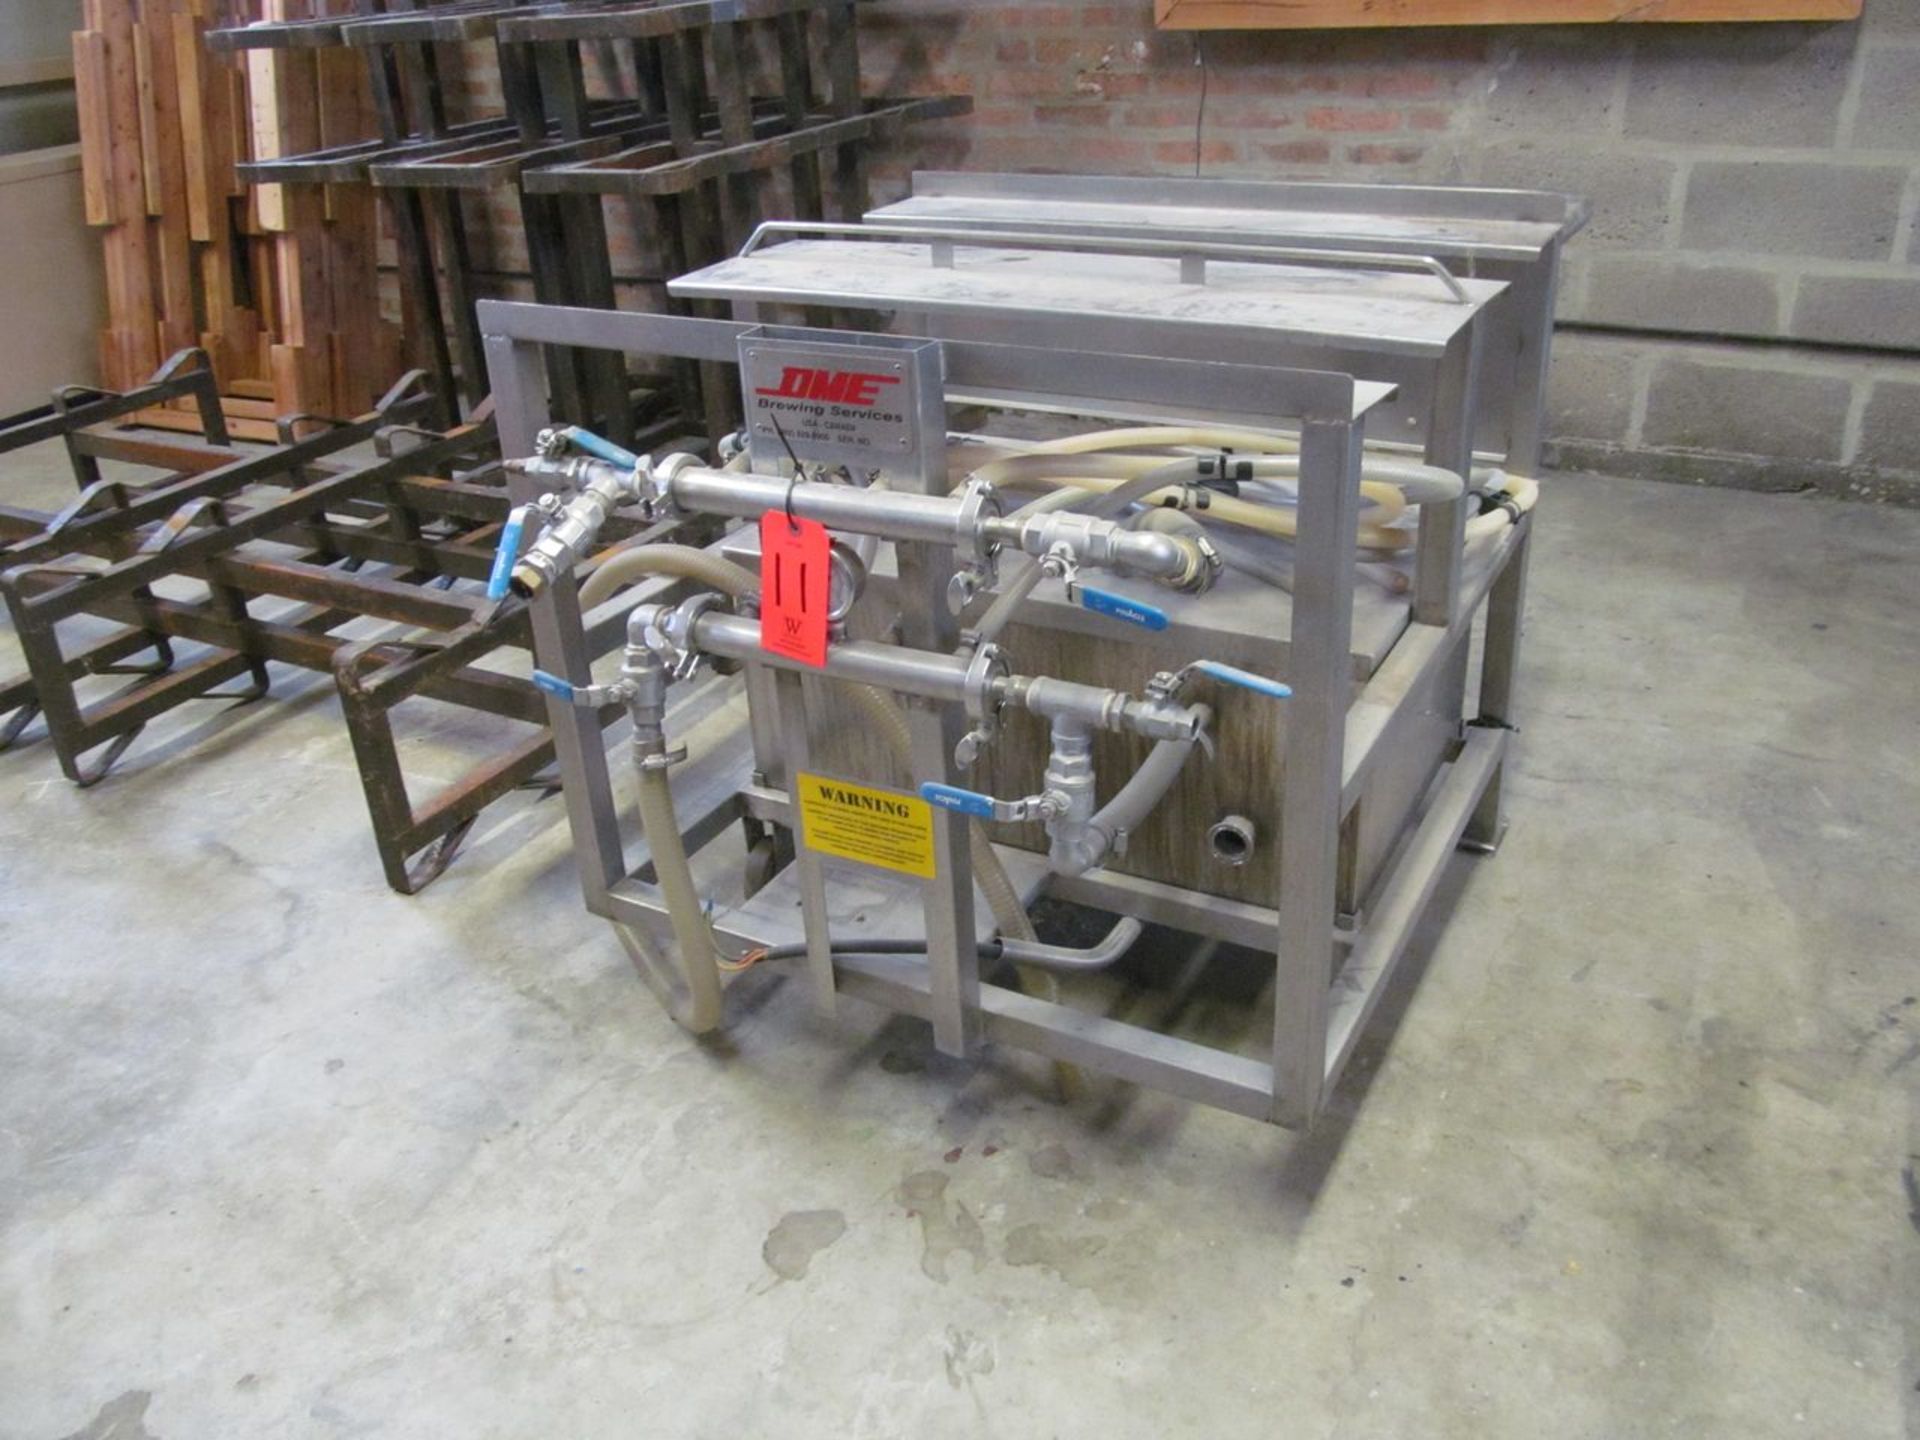 DME Brewing Services Keg Washer/Filler; 150 degree F / 65 degee C Max. Temp; 230v, 60hz, 3 phase